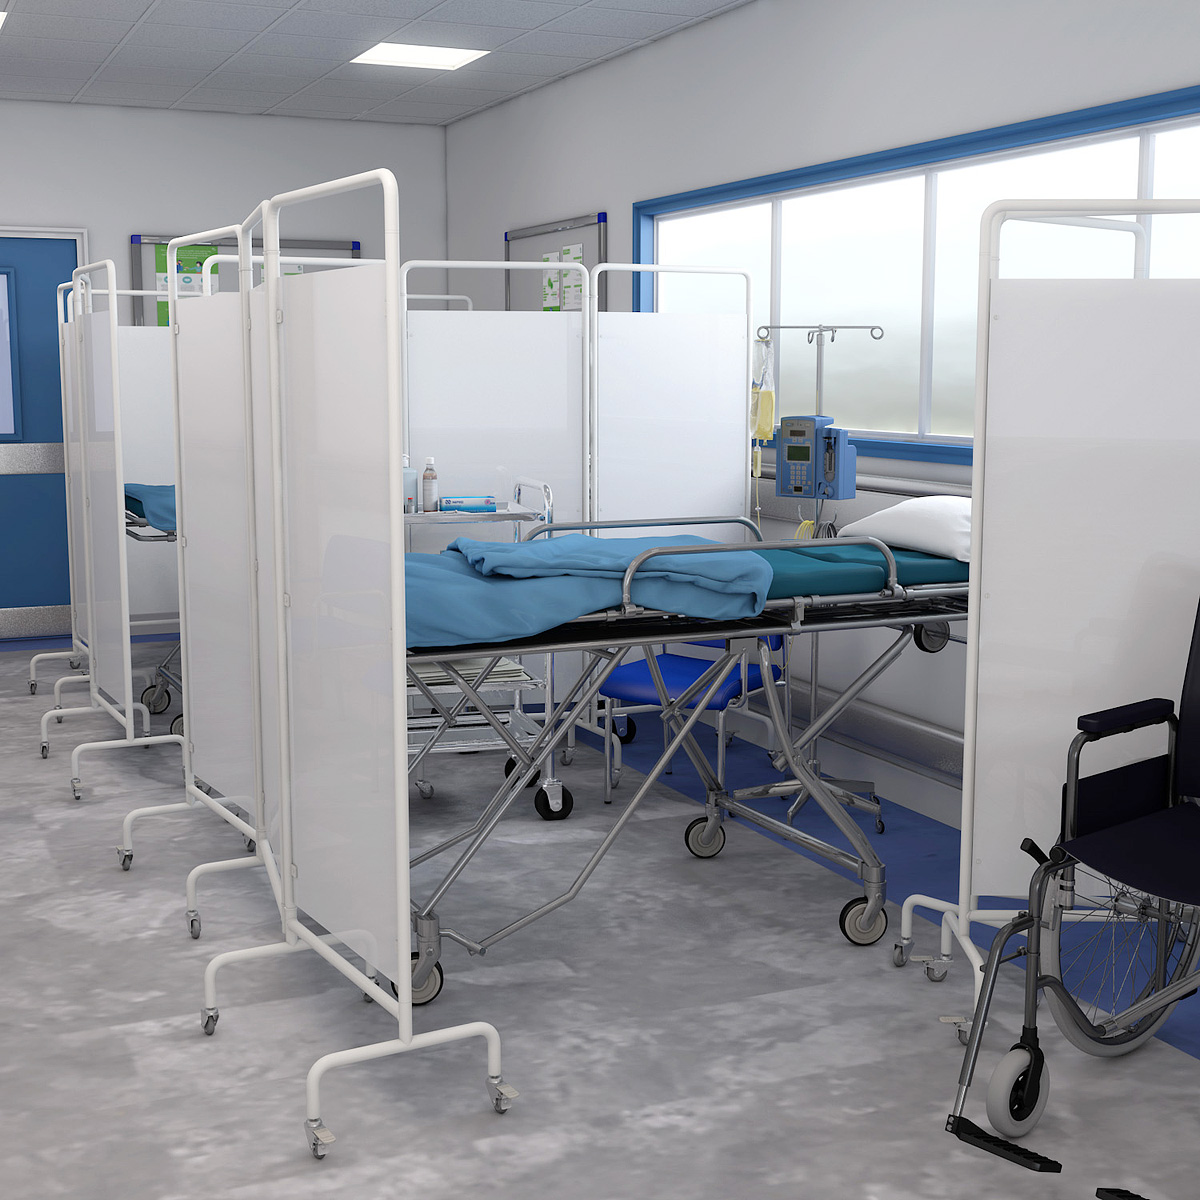 DIGNITY® Medical Screens Are Designed For NHS Hospitals And Medical Facilities